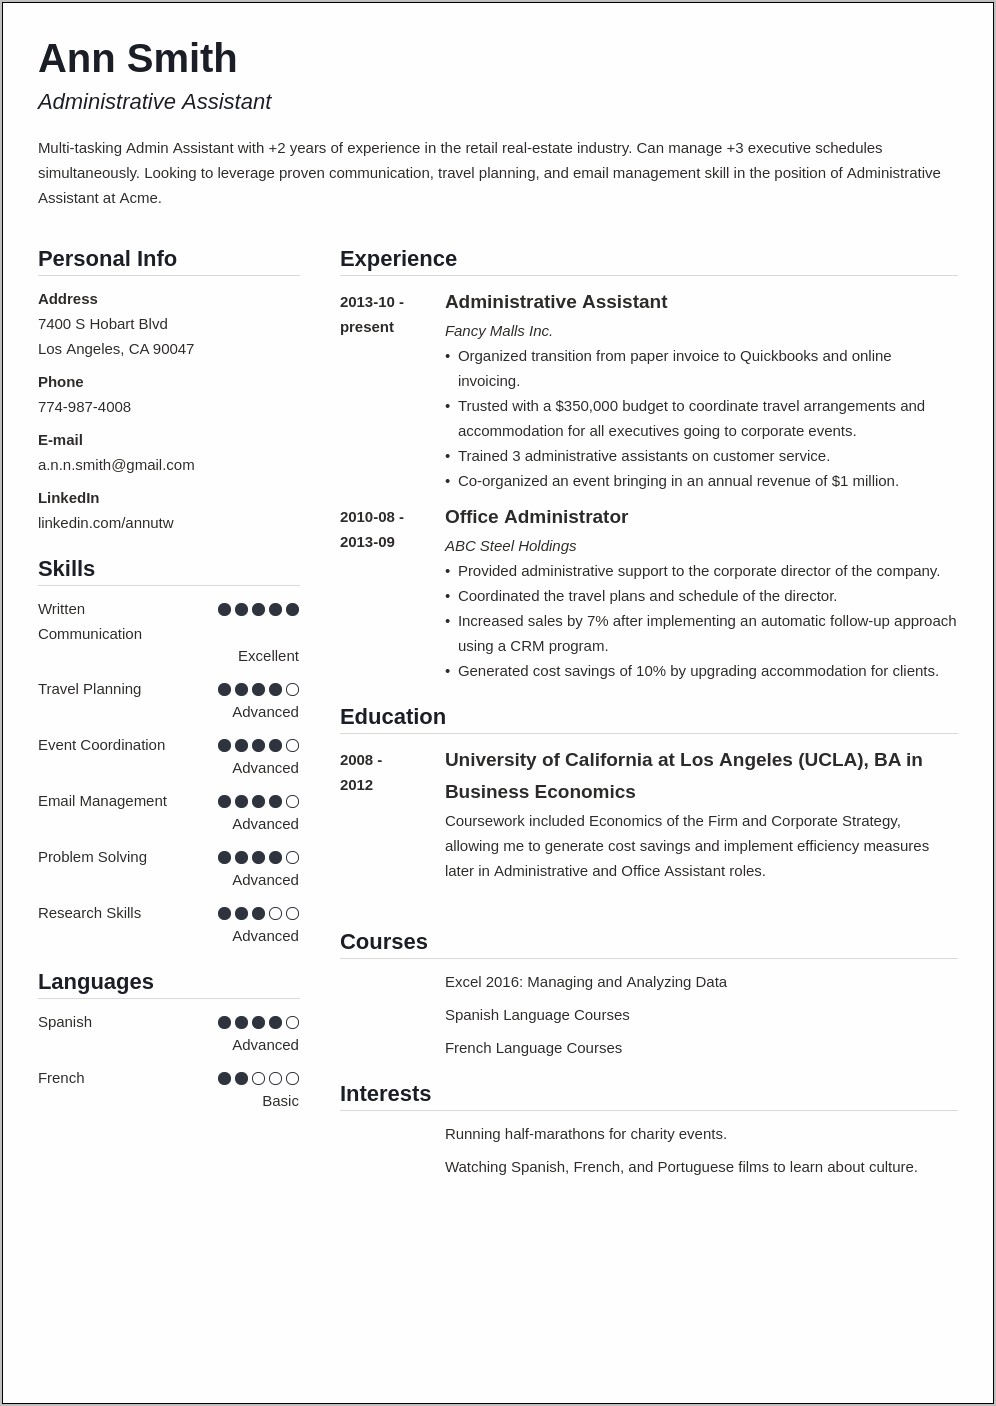 Sample Resume For Executive Assistant With Employment Gap